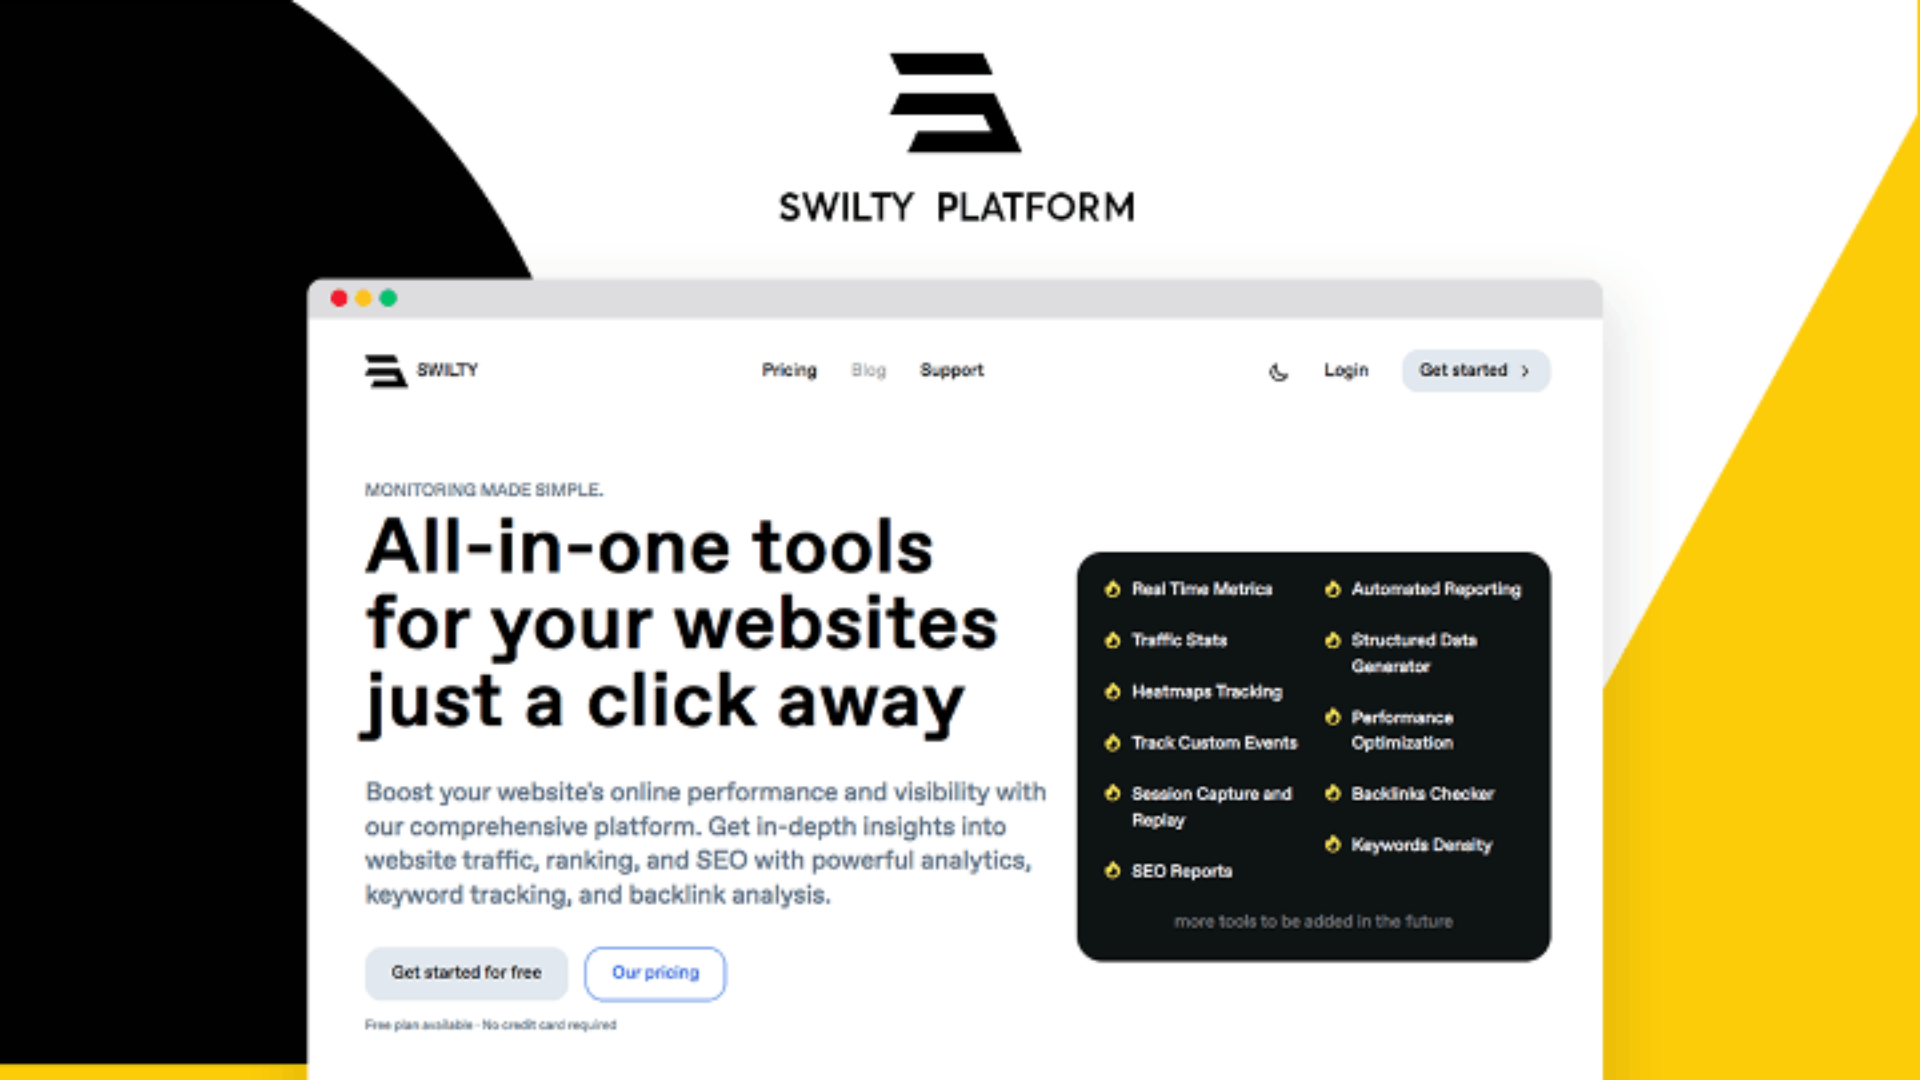 Lifetime Deal to Swilty Platform – All-in-one tools: Professional for $100